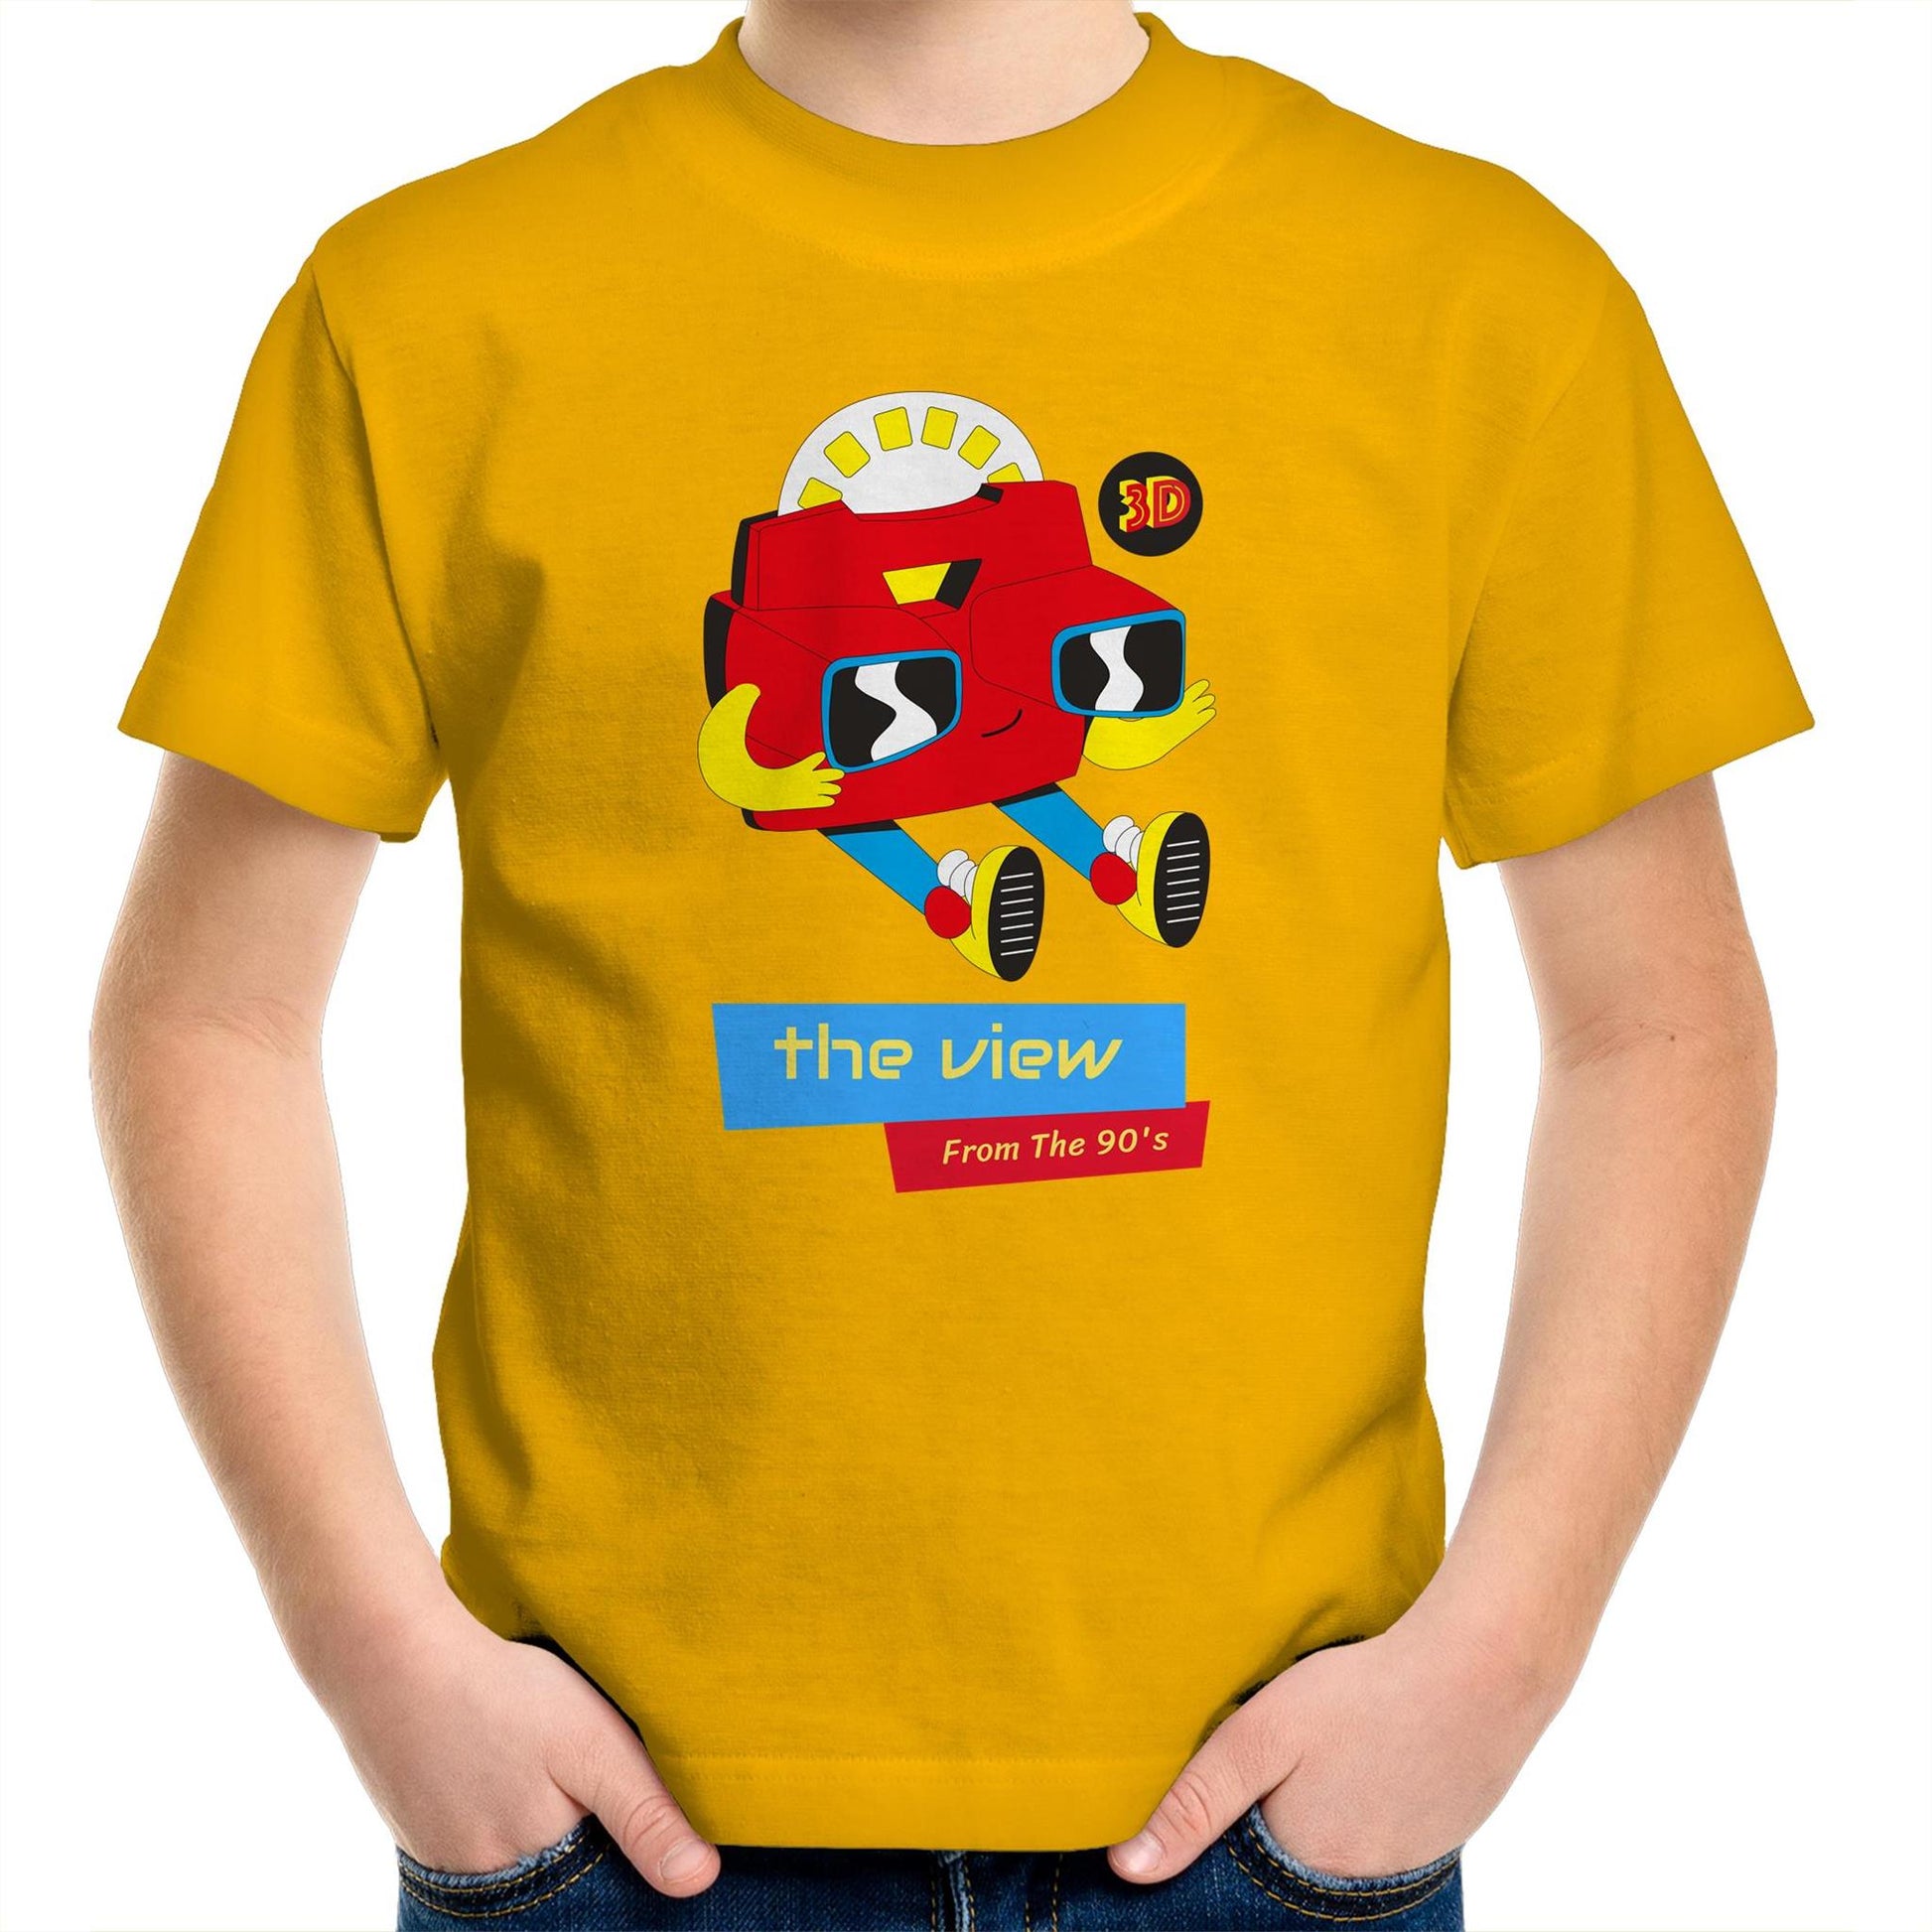 The View From The 90's - Kids Youth Crew T-Shirt Gold Kids Youth T-shirt Retro